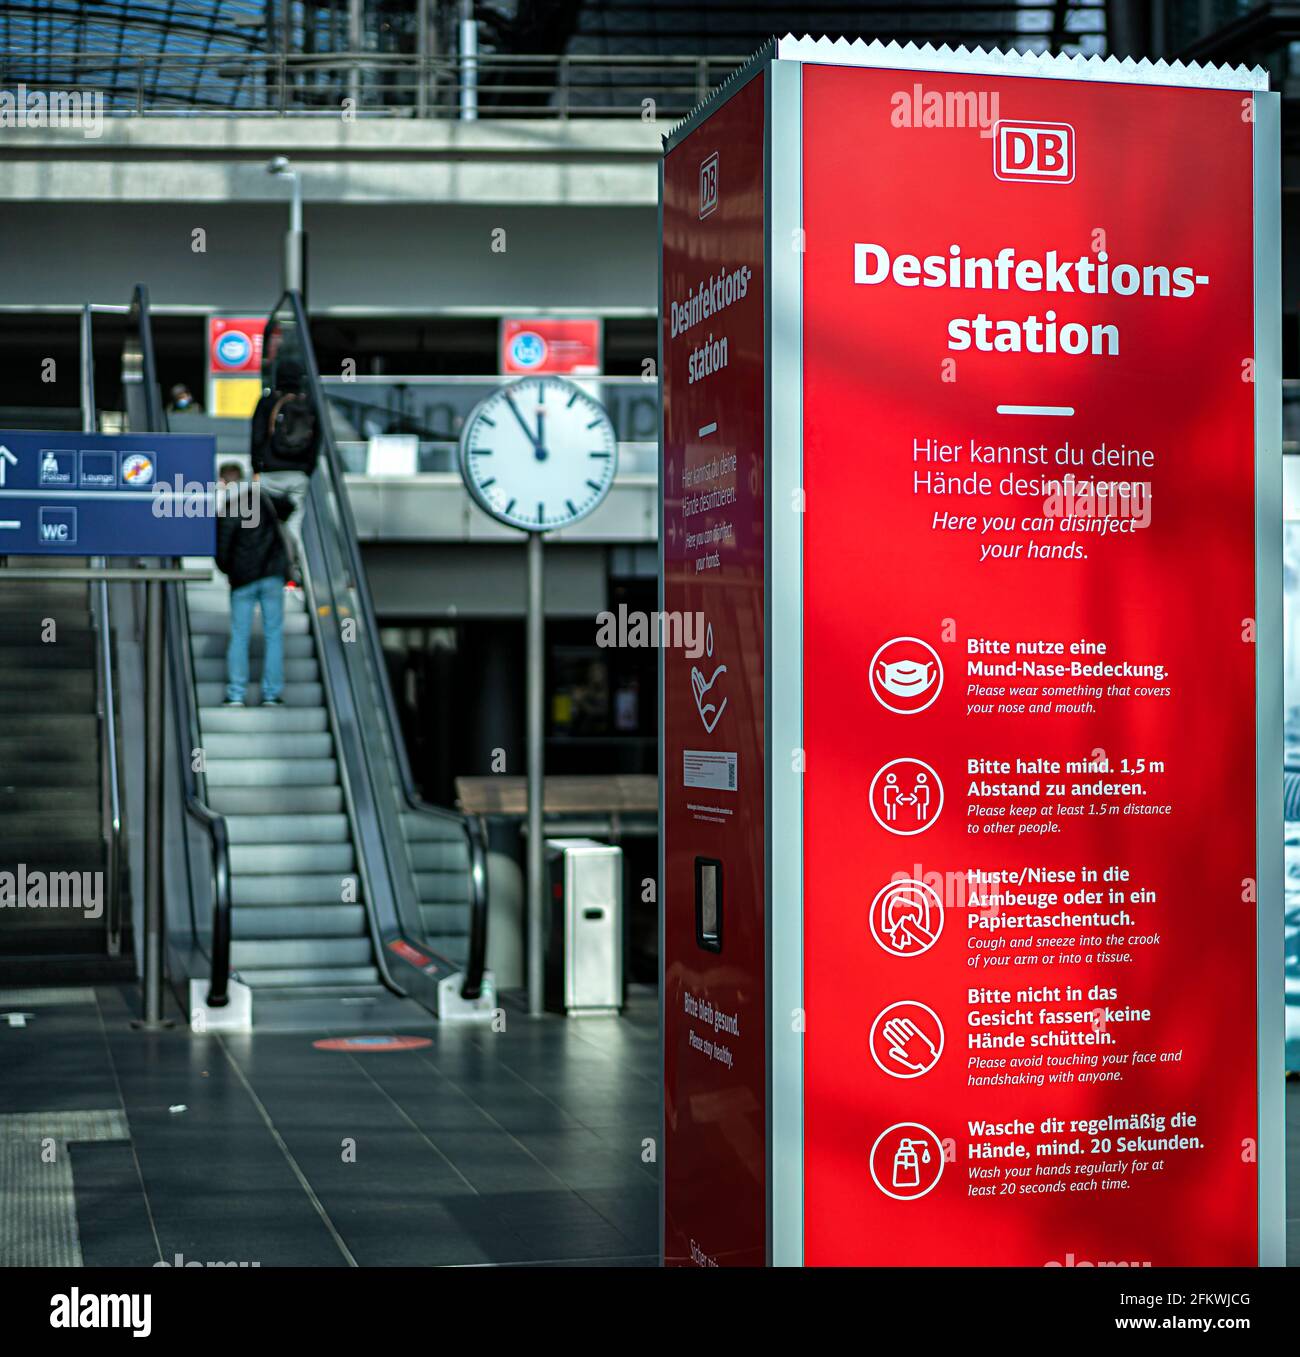 Disinfection Stand Of Deutsche Bahn At The Entrance To Berlin Central Station Stock Photo